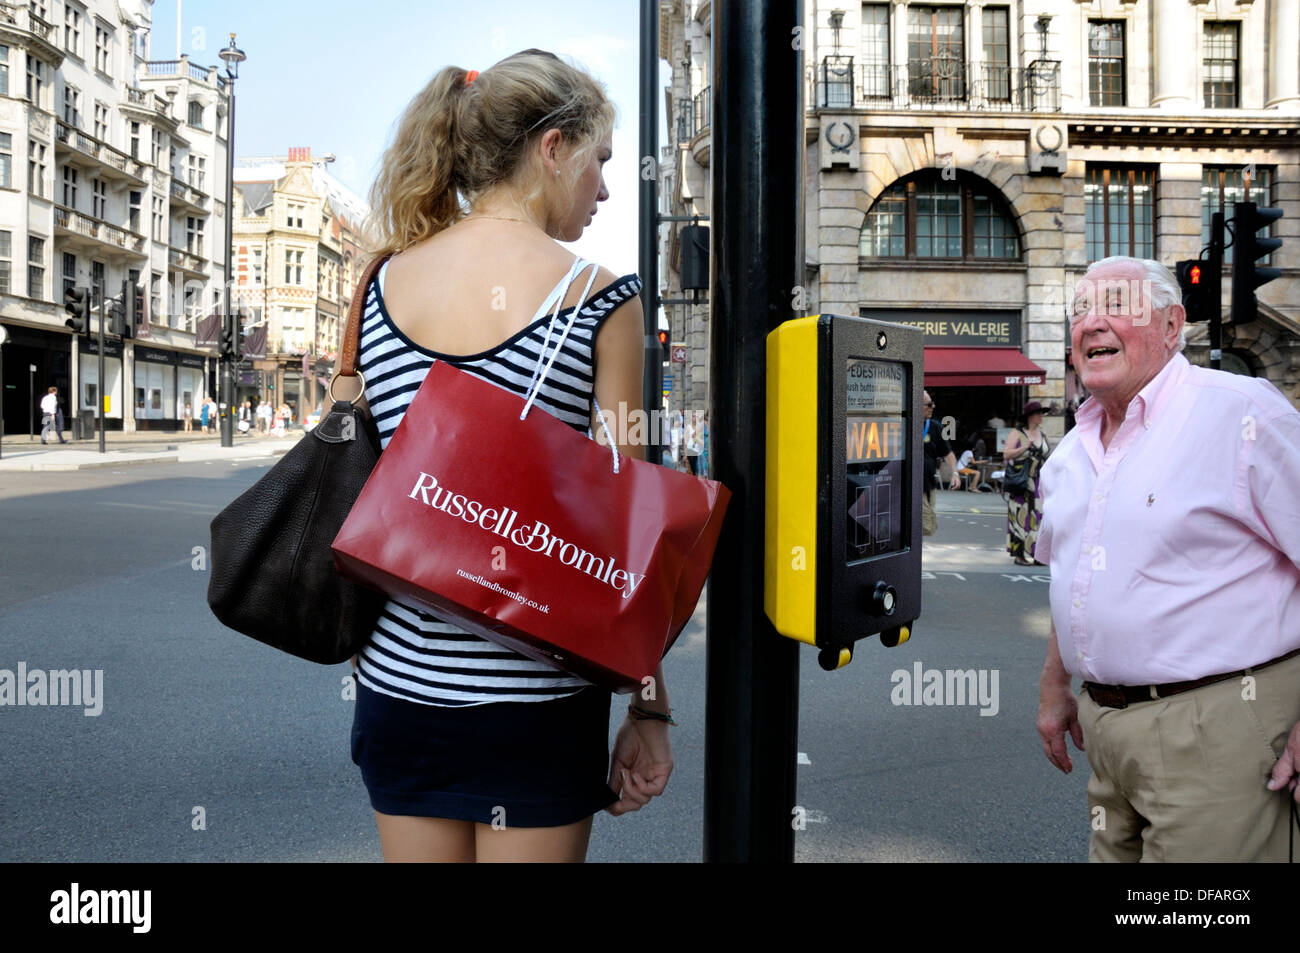 London, England, UK. Young woman talking to older man in Piccadilly Stock Photo